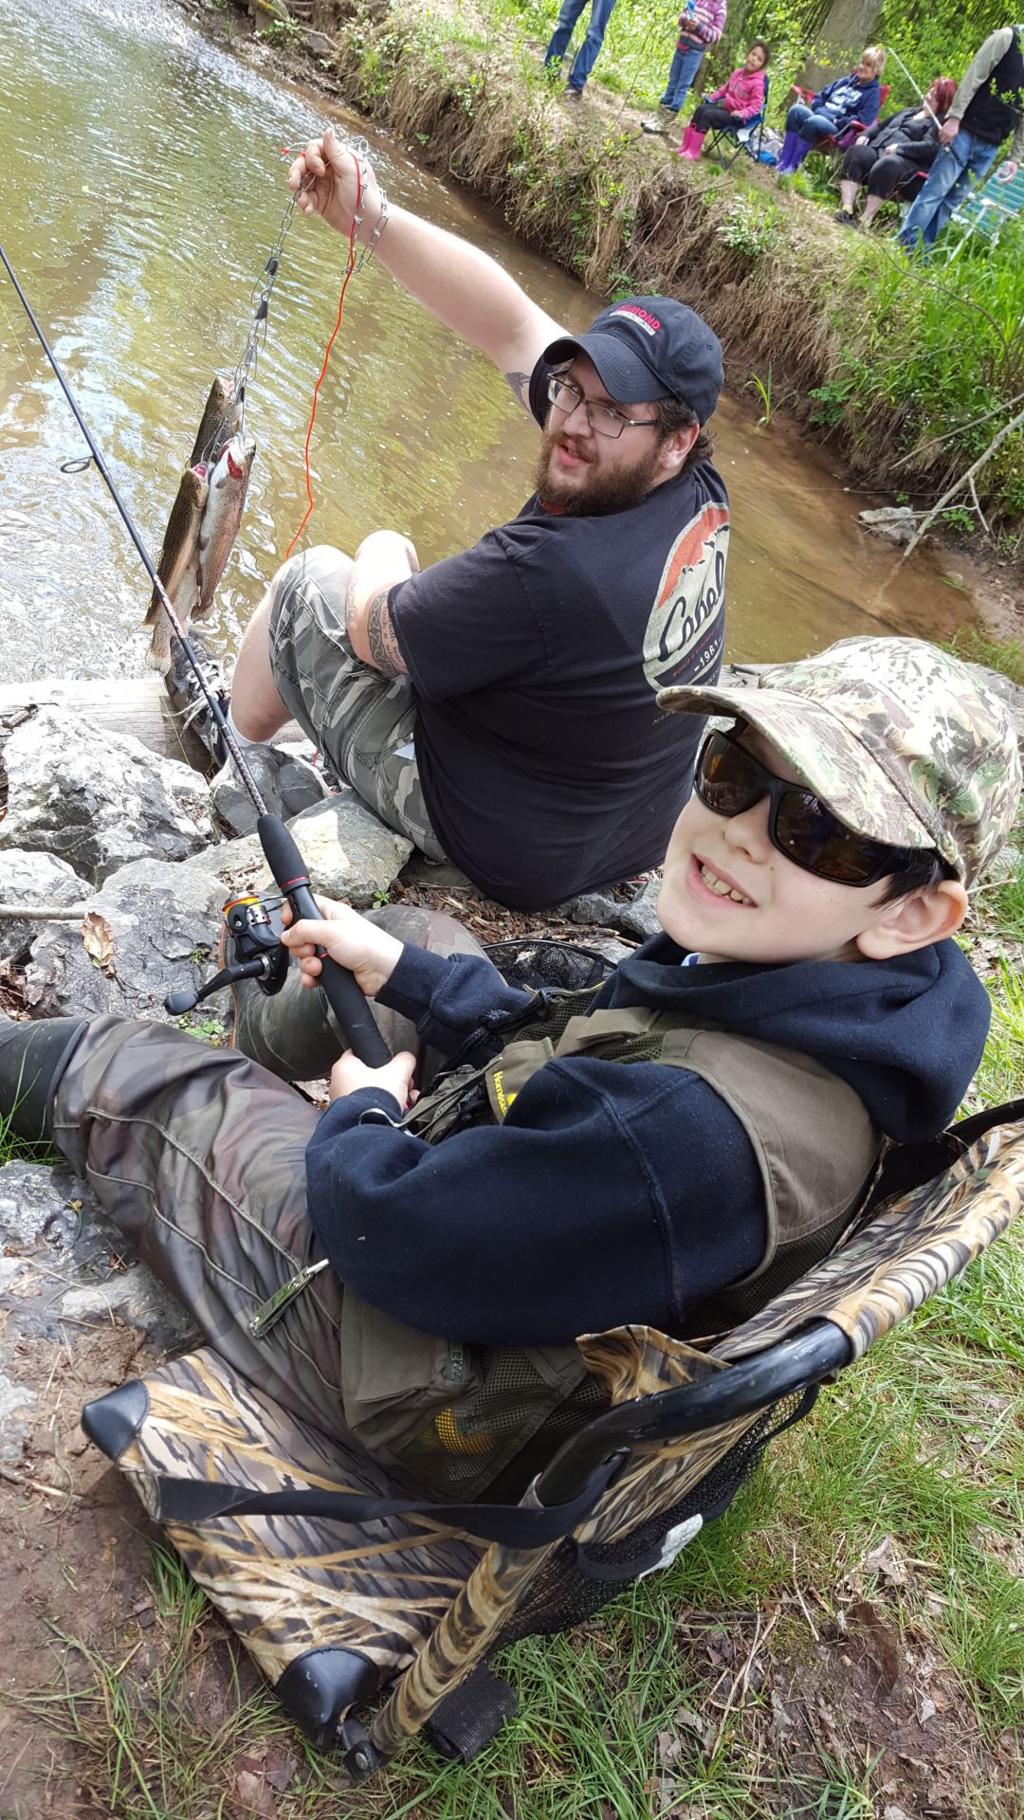 Trout derby lures hundreds to Little Shamokin Creek